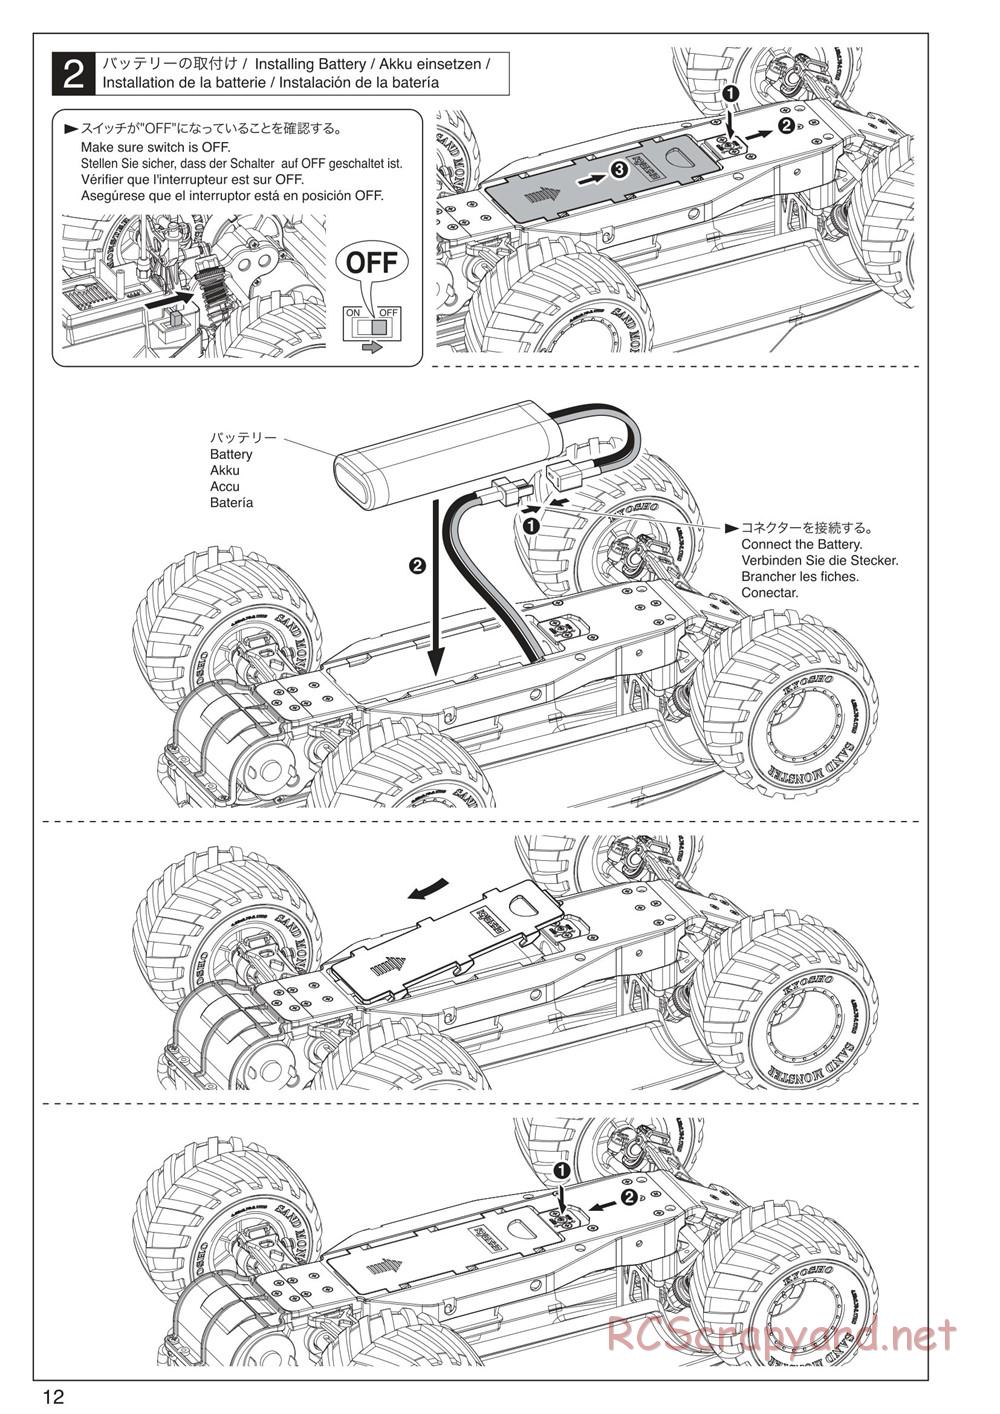 Kyosho - Monster Tracker EP - Manual - Page 12